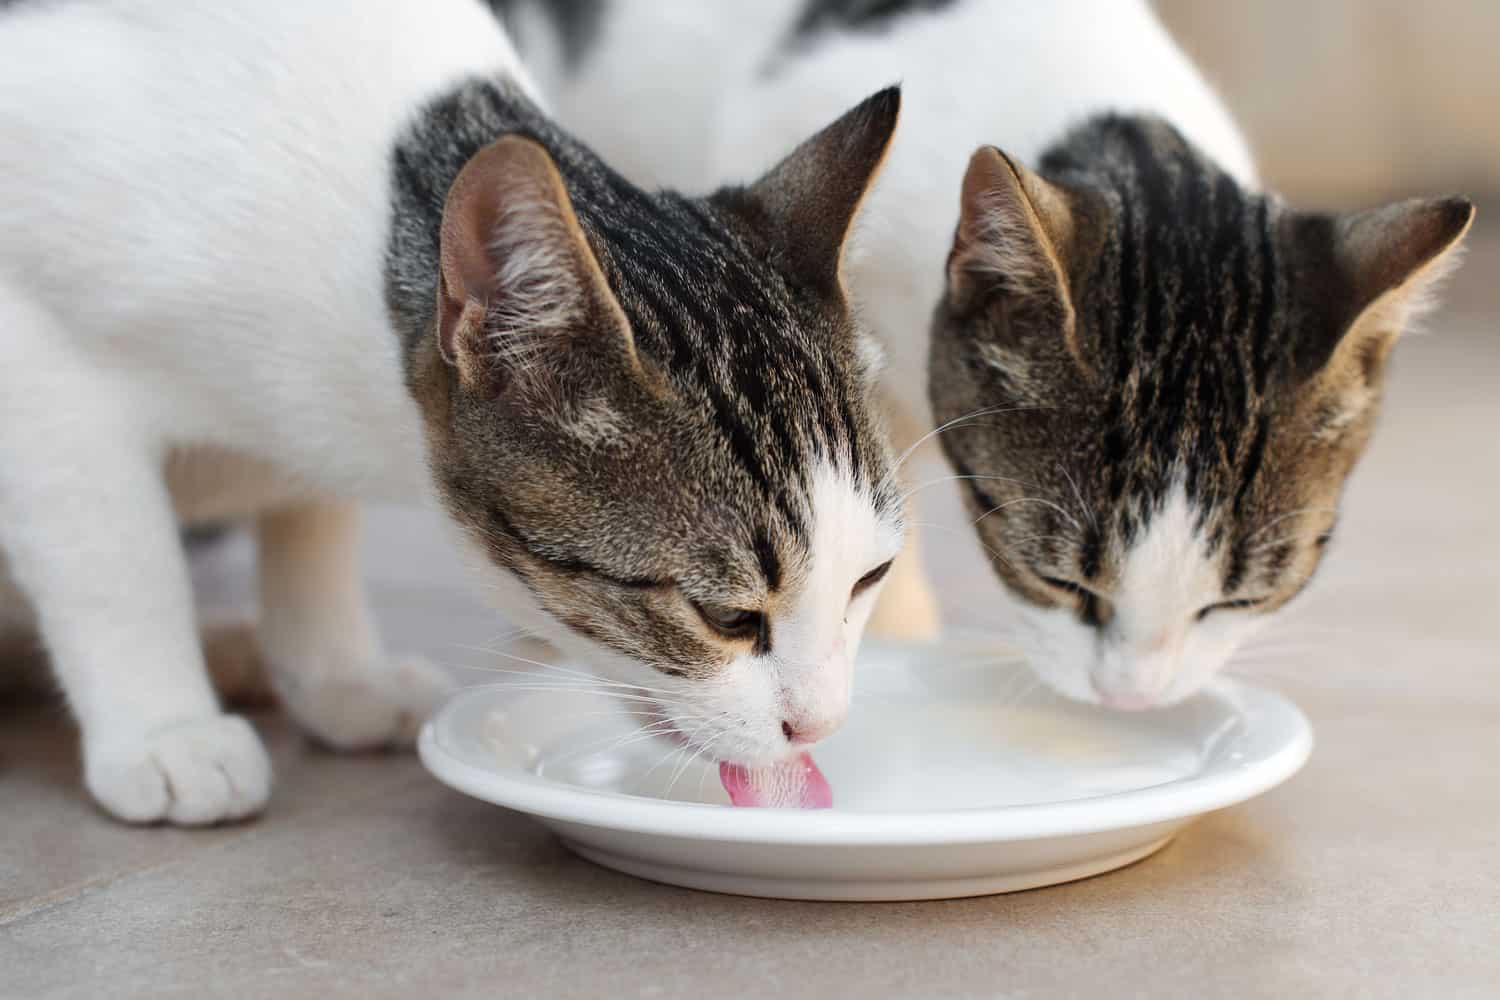 Two cats drinking milk in the kitchen